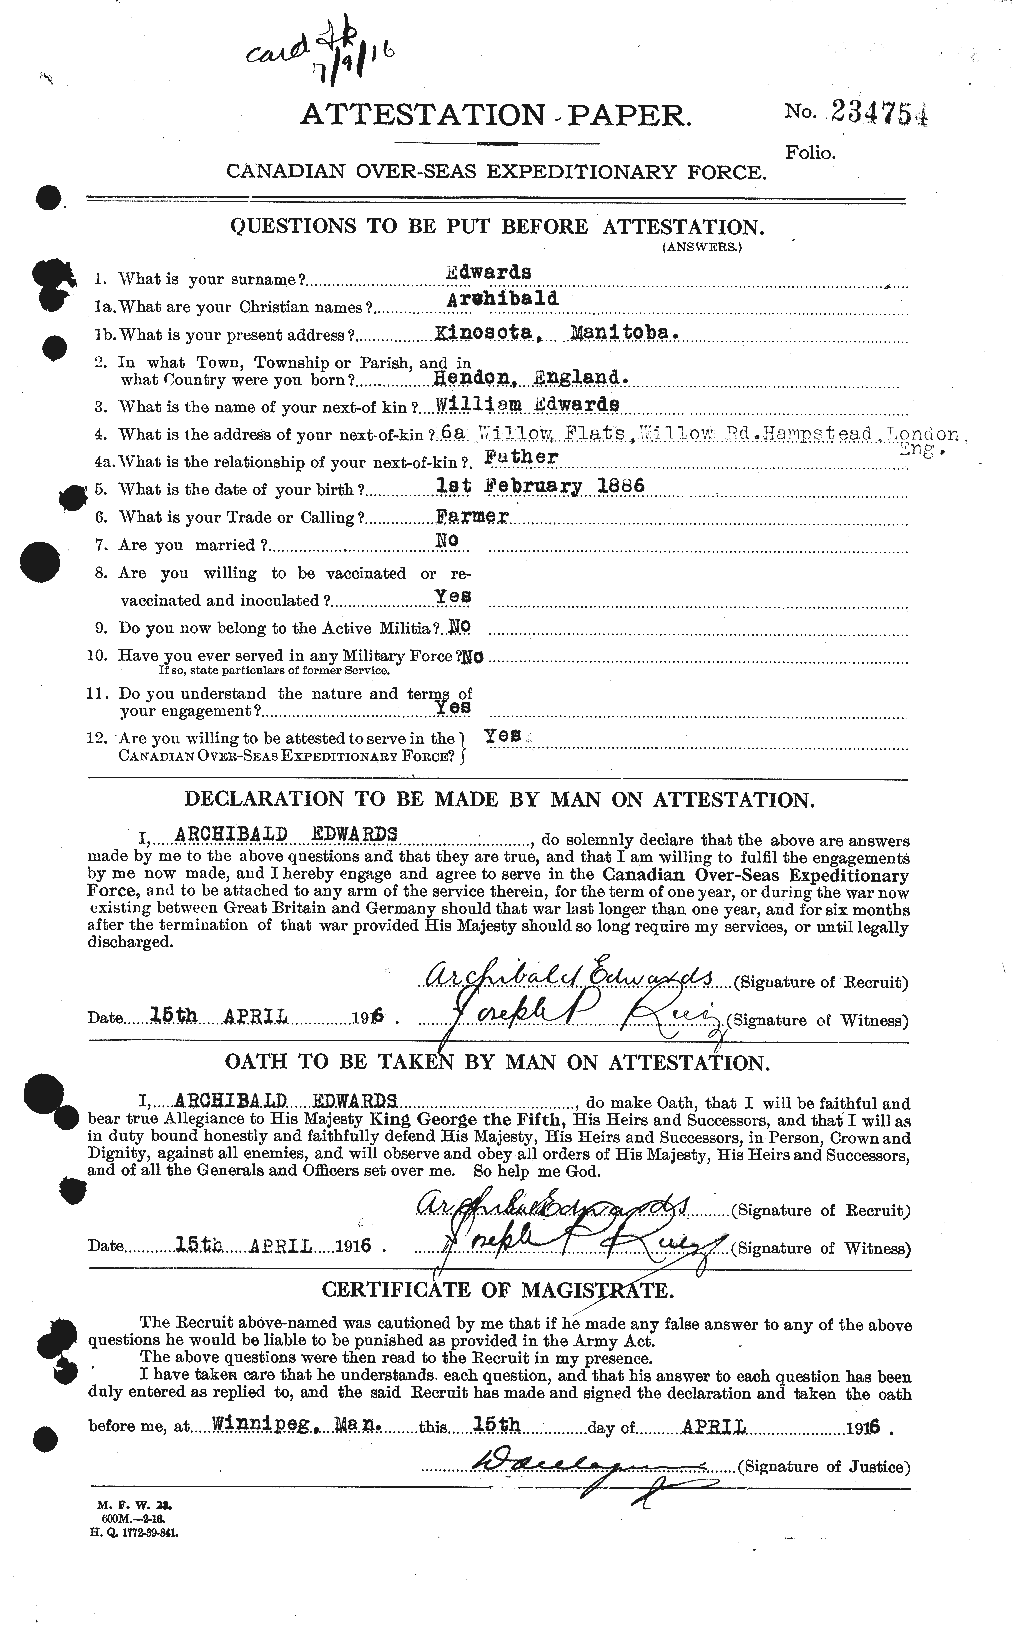 Personnel Records of the First World War - CEF 313120a